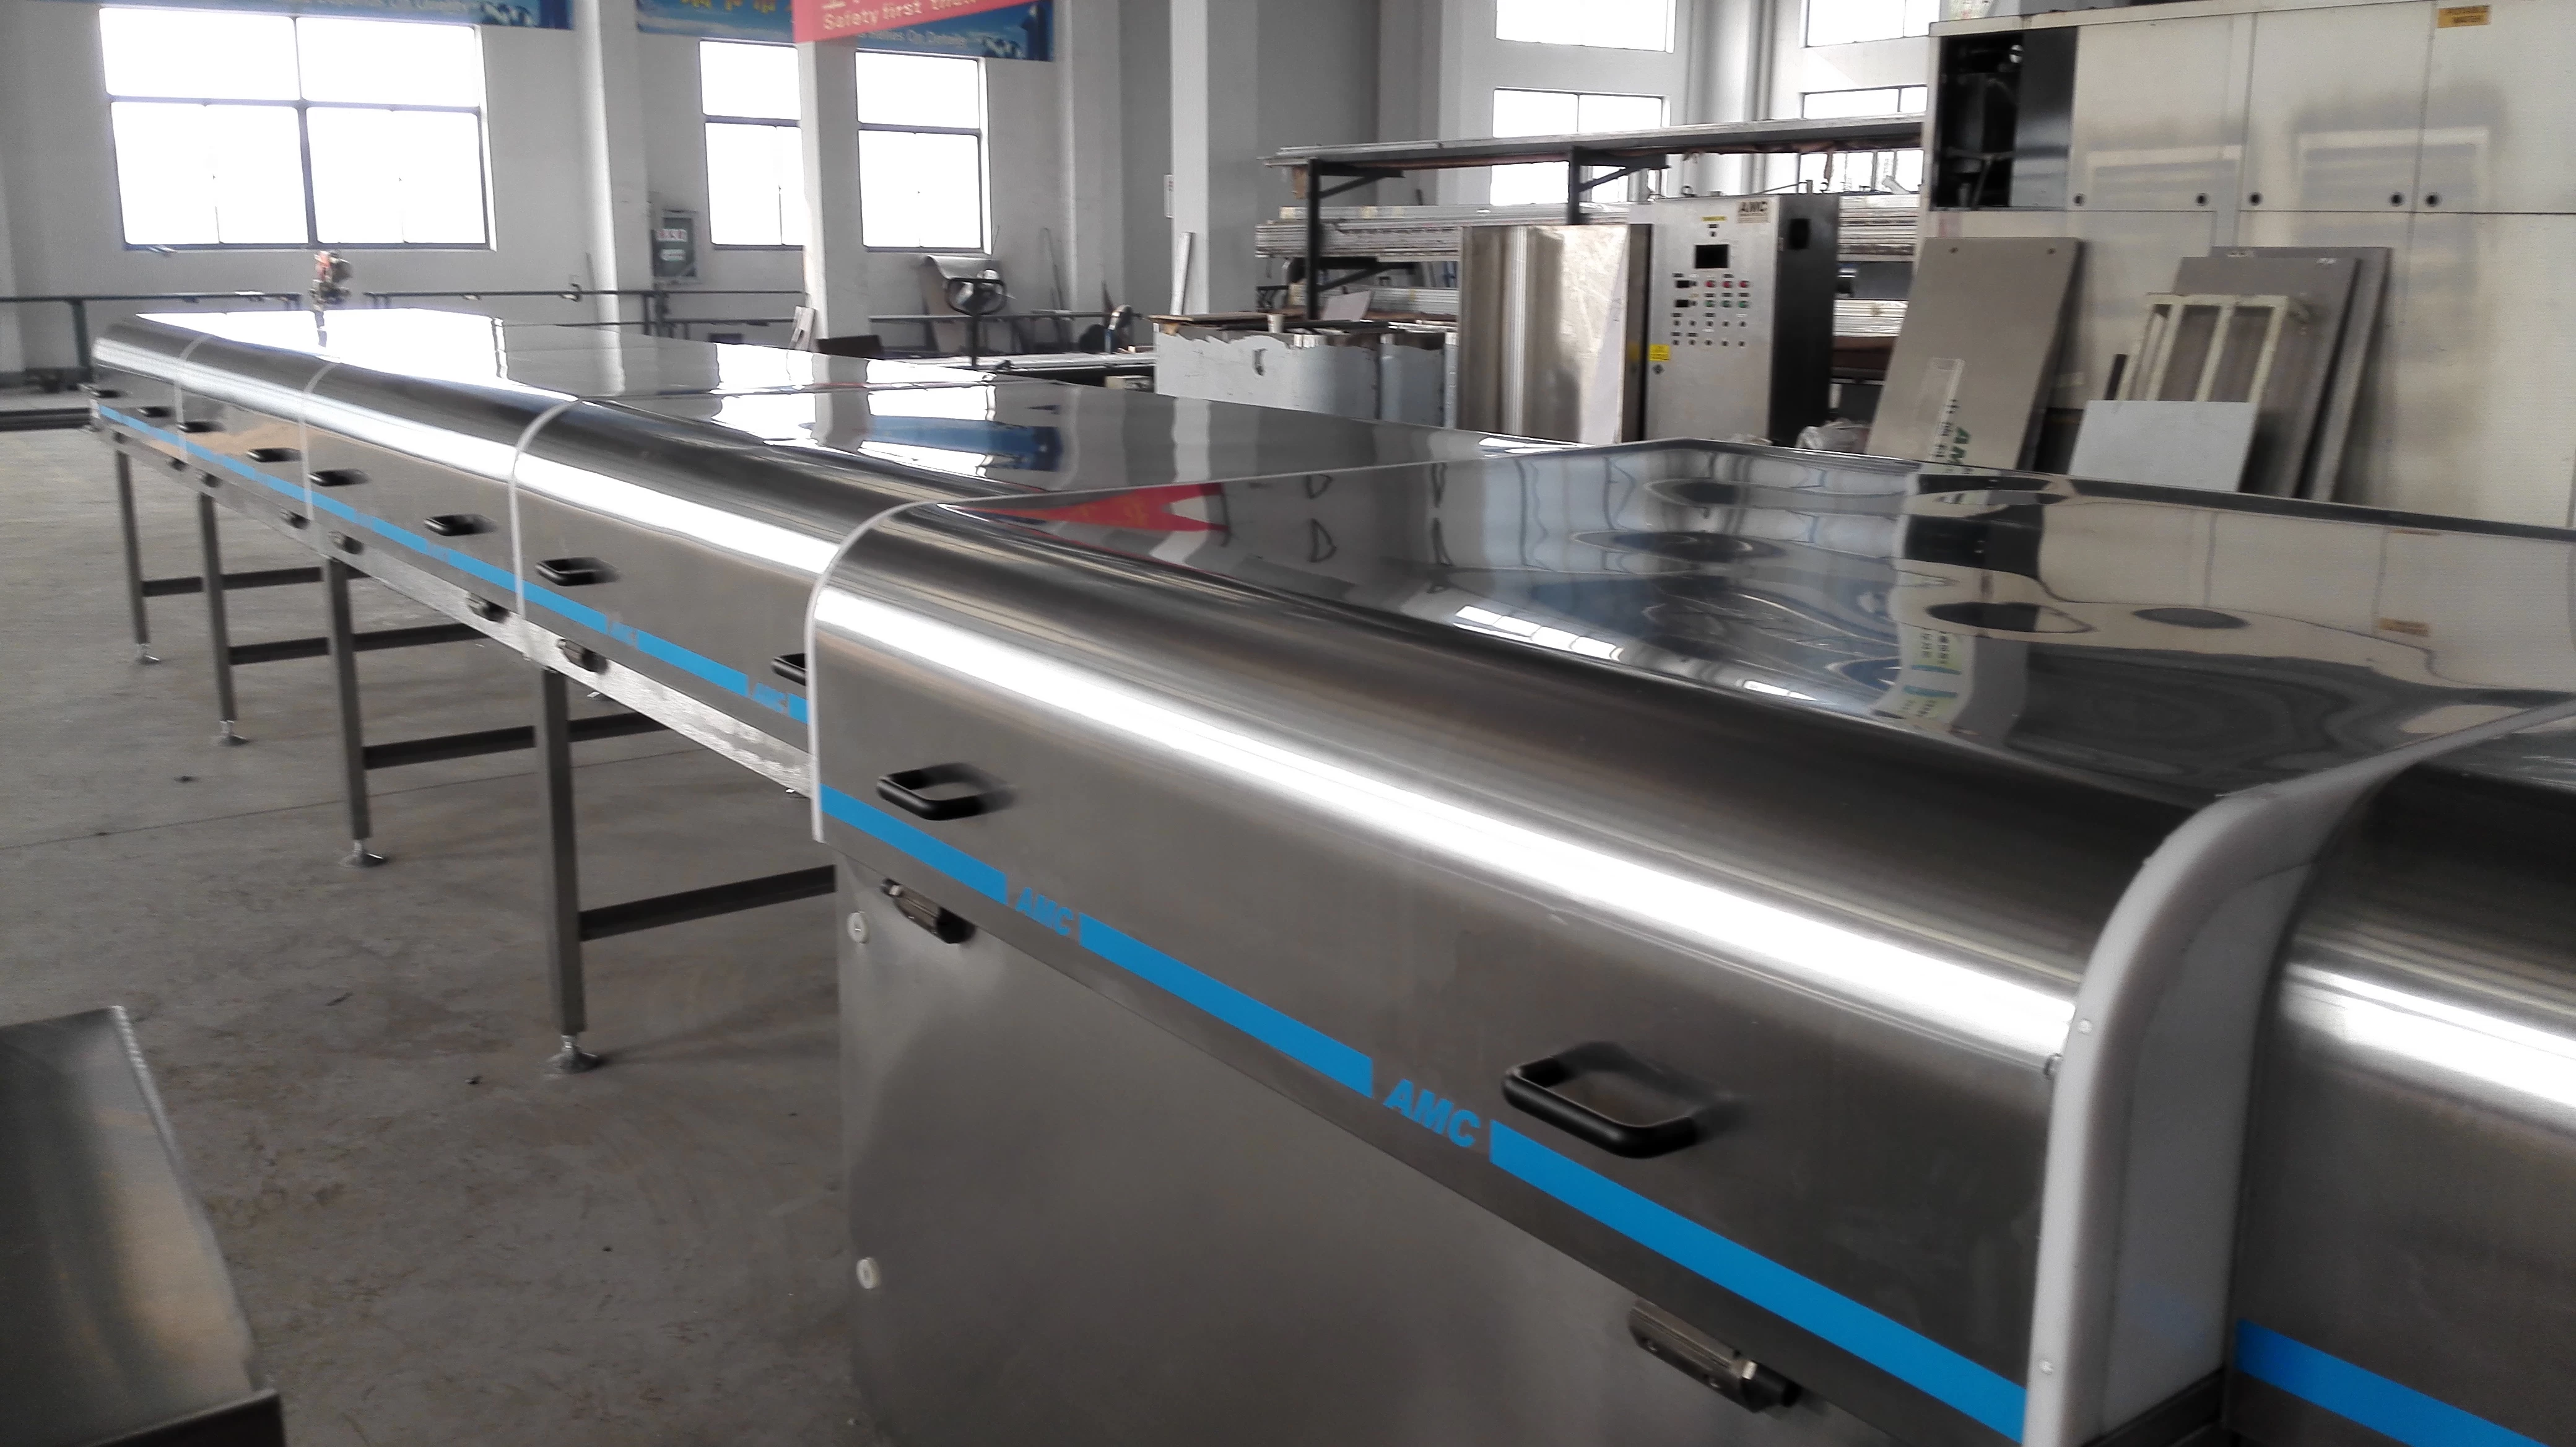 Cooling and Freezing Conveyors Food Steel Belt